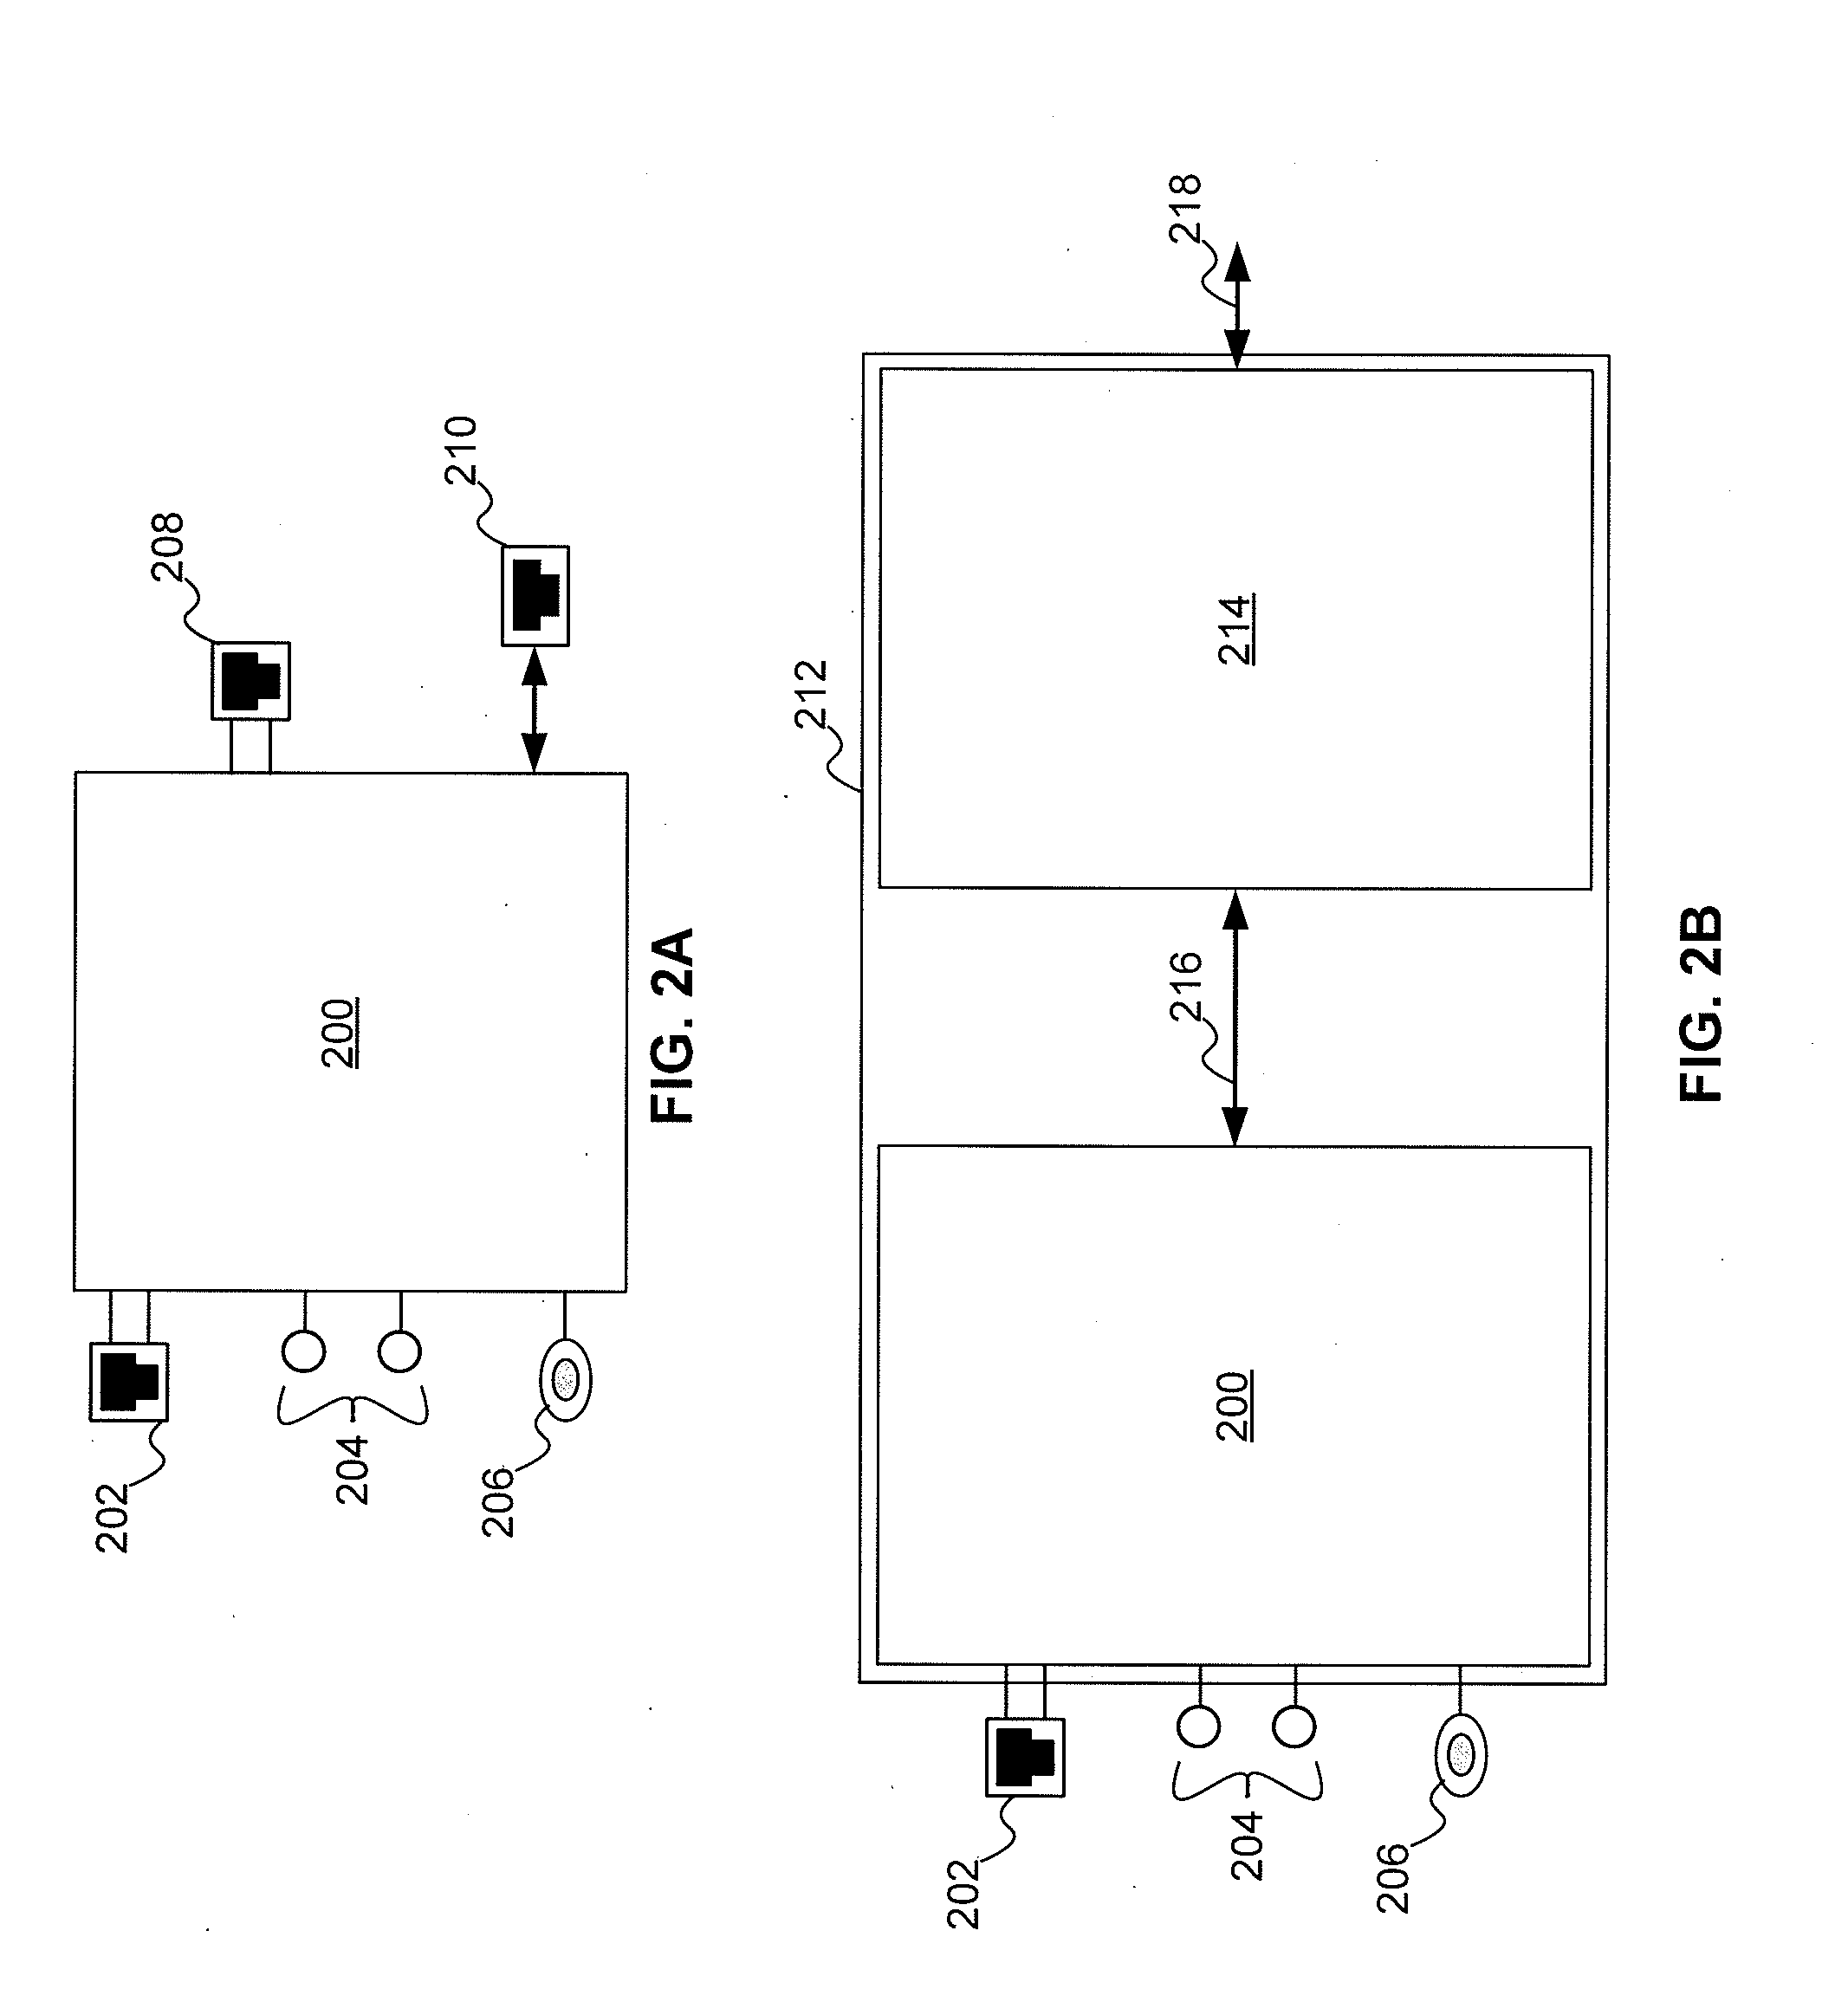 Multi-Wideband Communications over Multiple Mediums within a Network